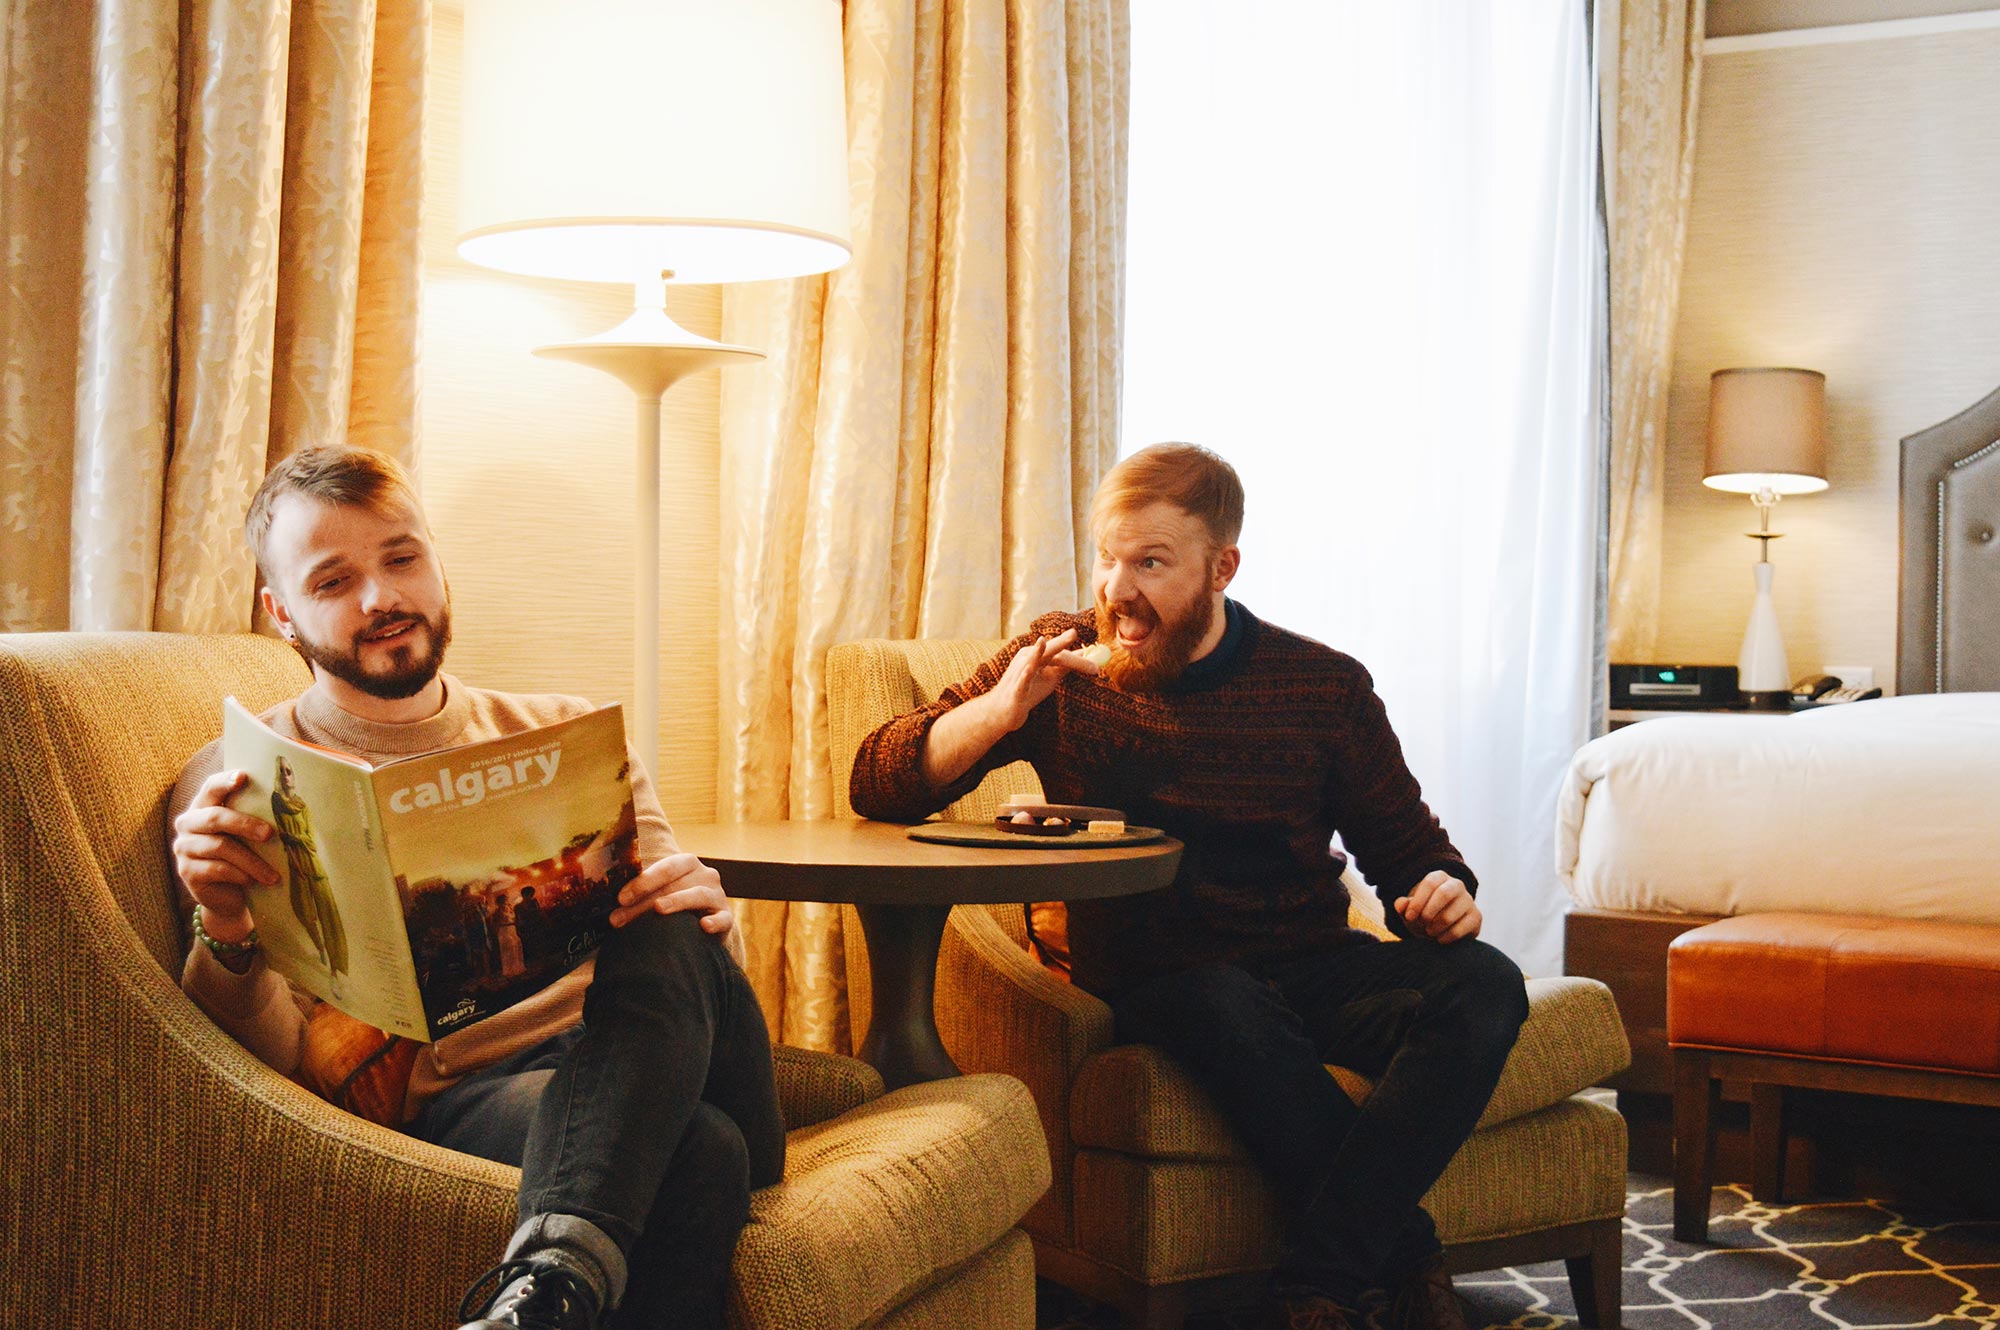 Karl reading about Calgary while Daan secretly eats all sweets | Gay-friendly Fairmont Palliser Hotel Downtown Calgary © CoupleofMen.com